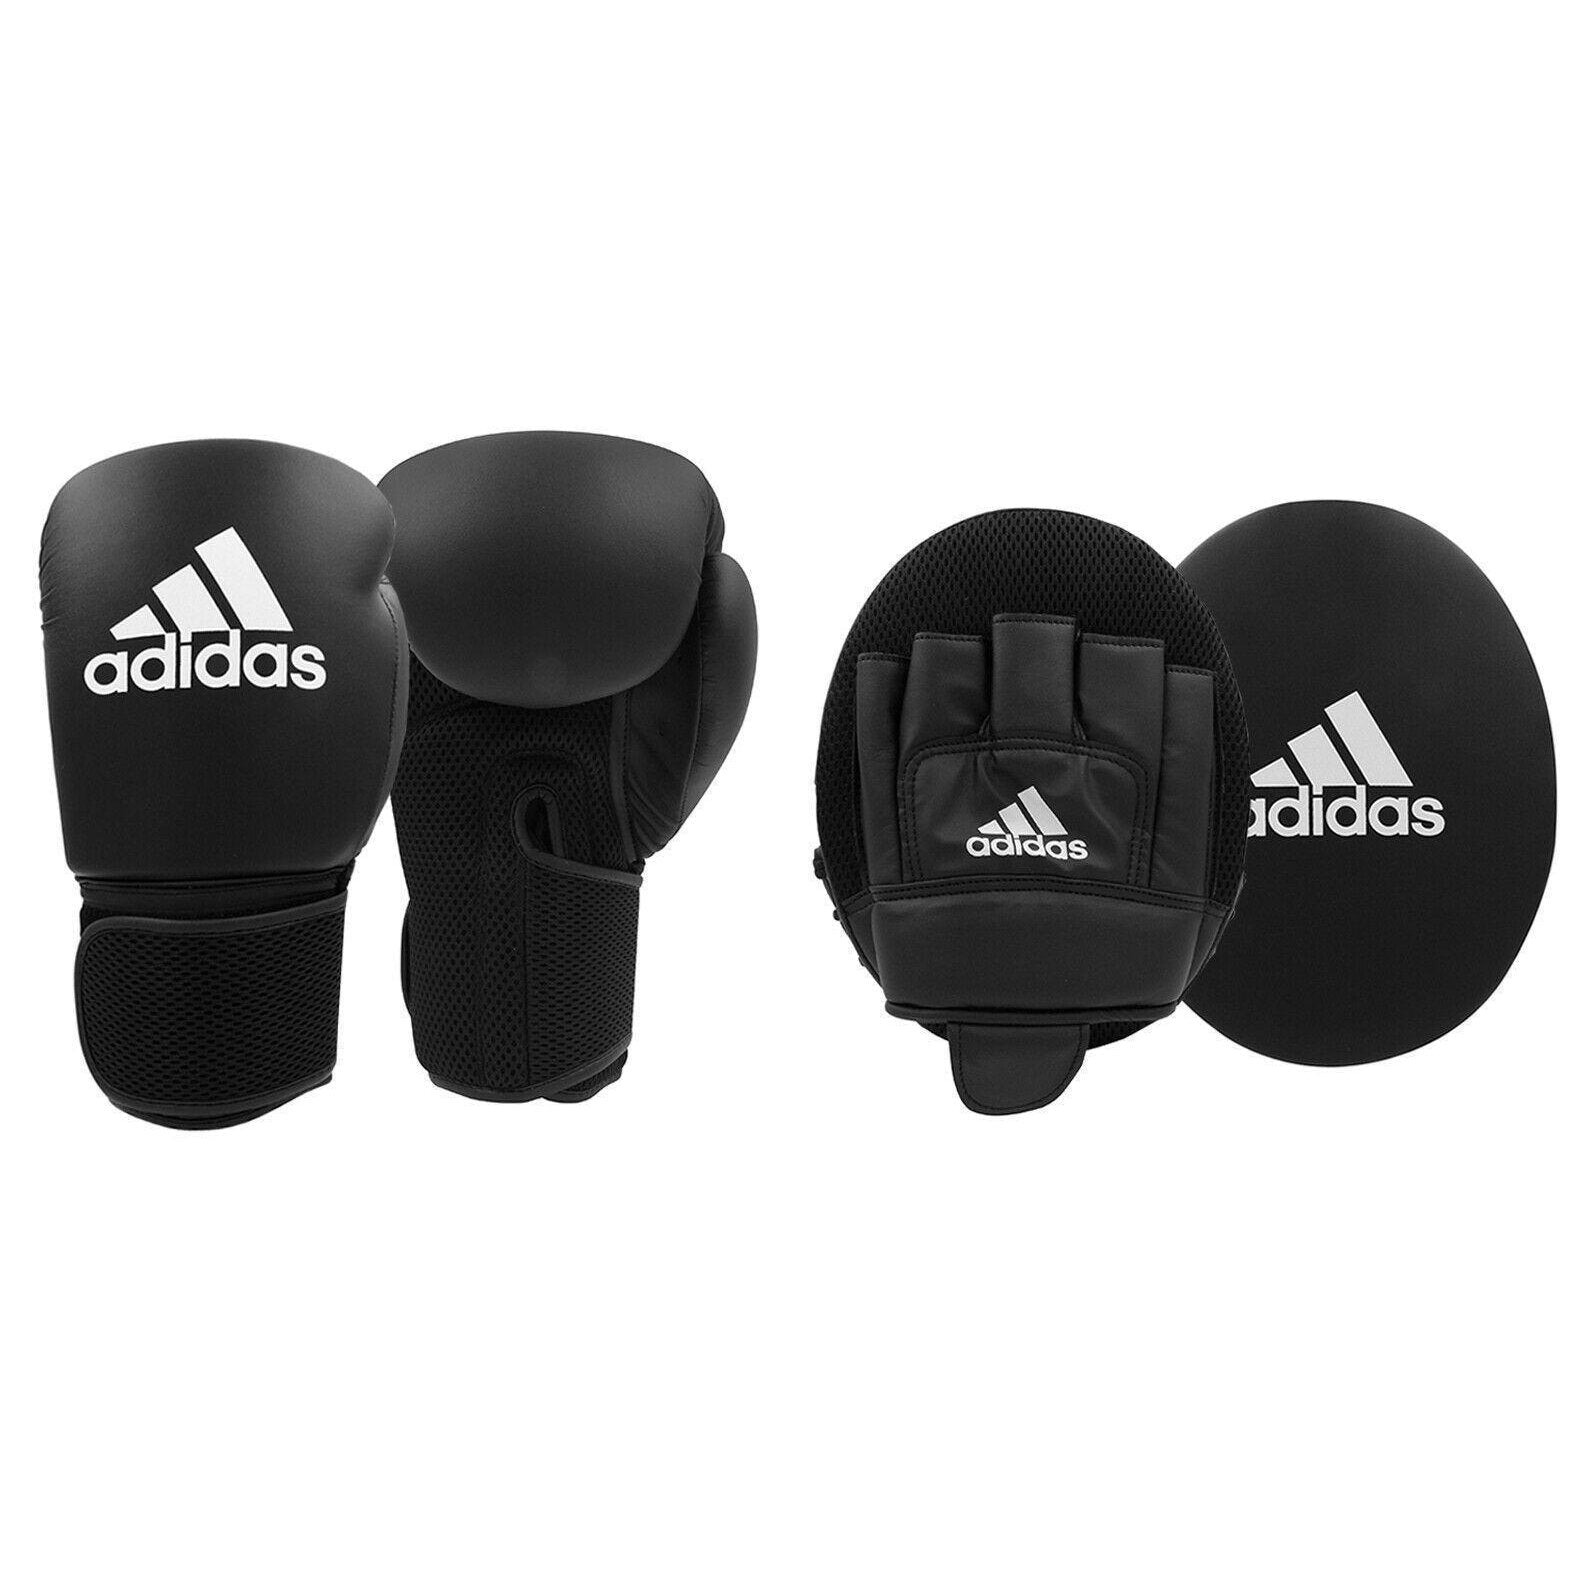 adidas Boxing Gloves & Focus Mitts Beginners Set Kids Adults - Budo Online